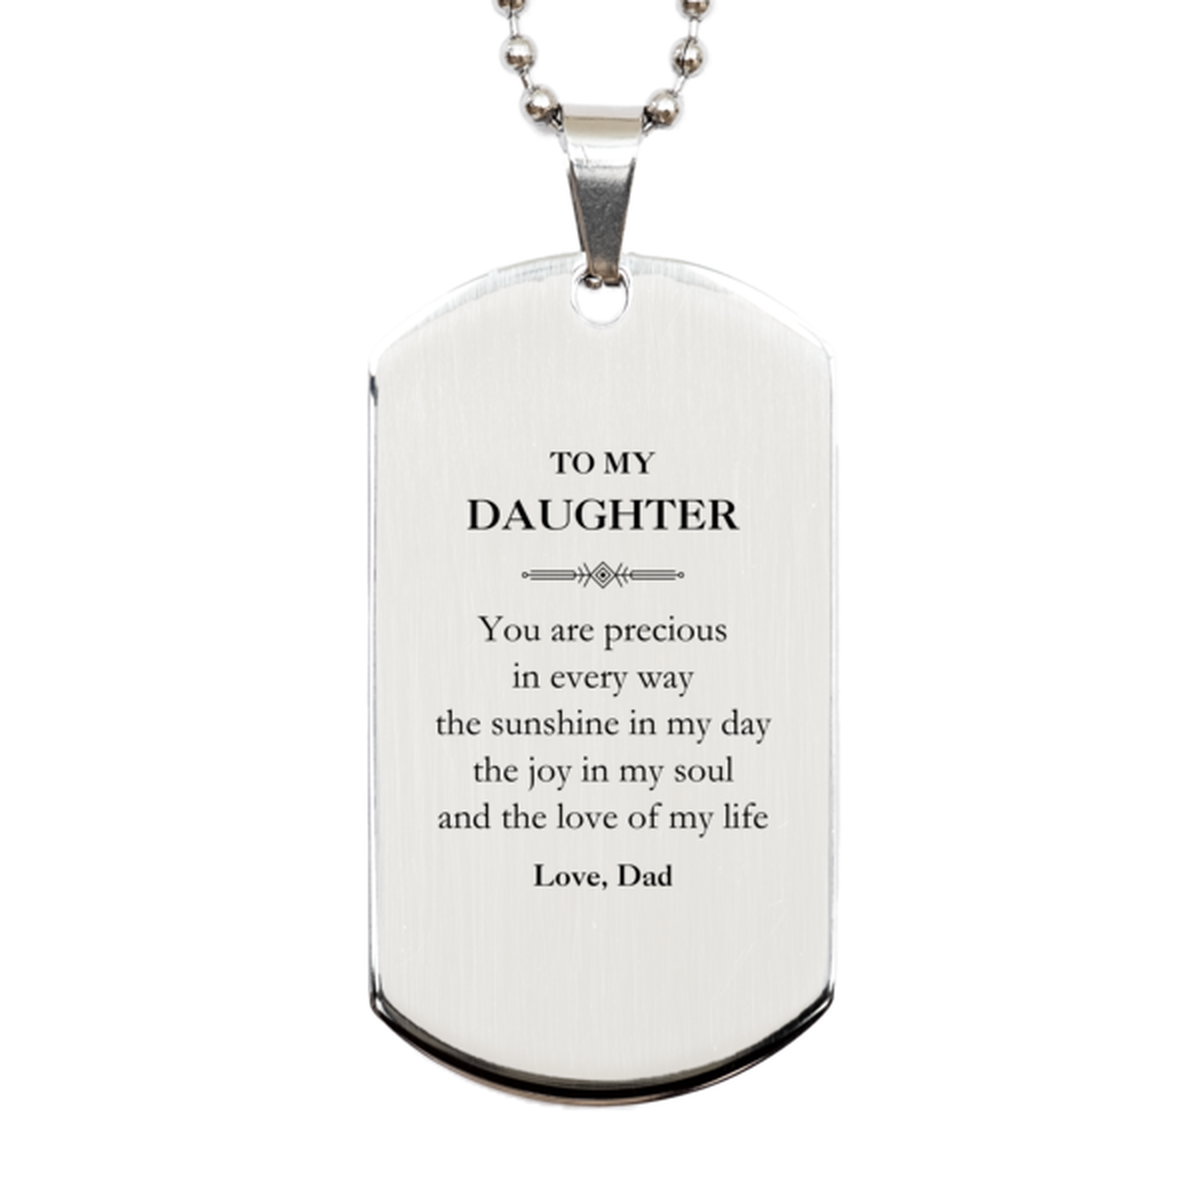 Graduation Gifts for Daughter Silver Dog Tag Present from Dad, Christmas Daughter Birthday Gifts Daughter You are precious in every way the sunshine in my day. Love, Dad